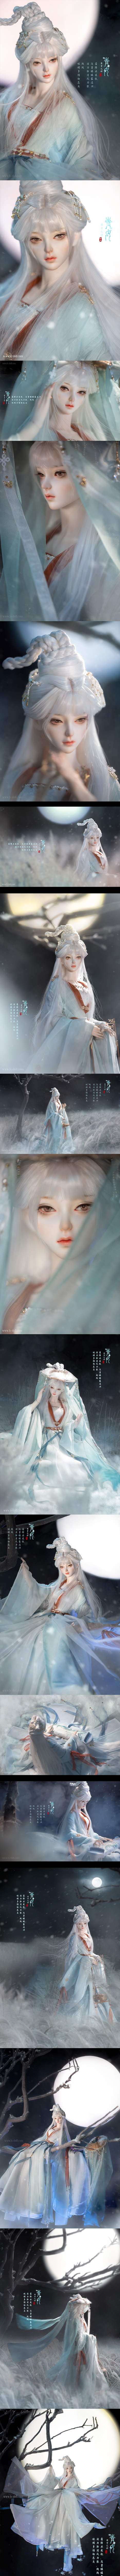 God of Frost-Qing Ball-jointed doll